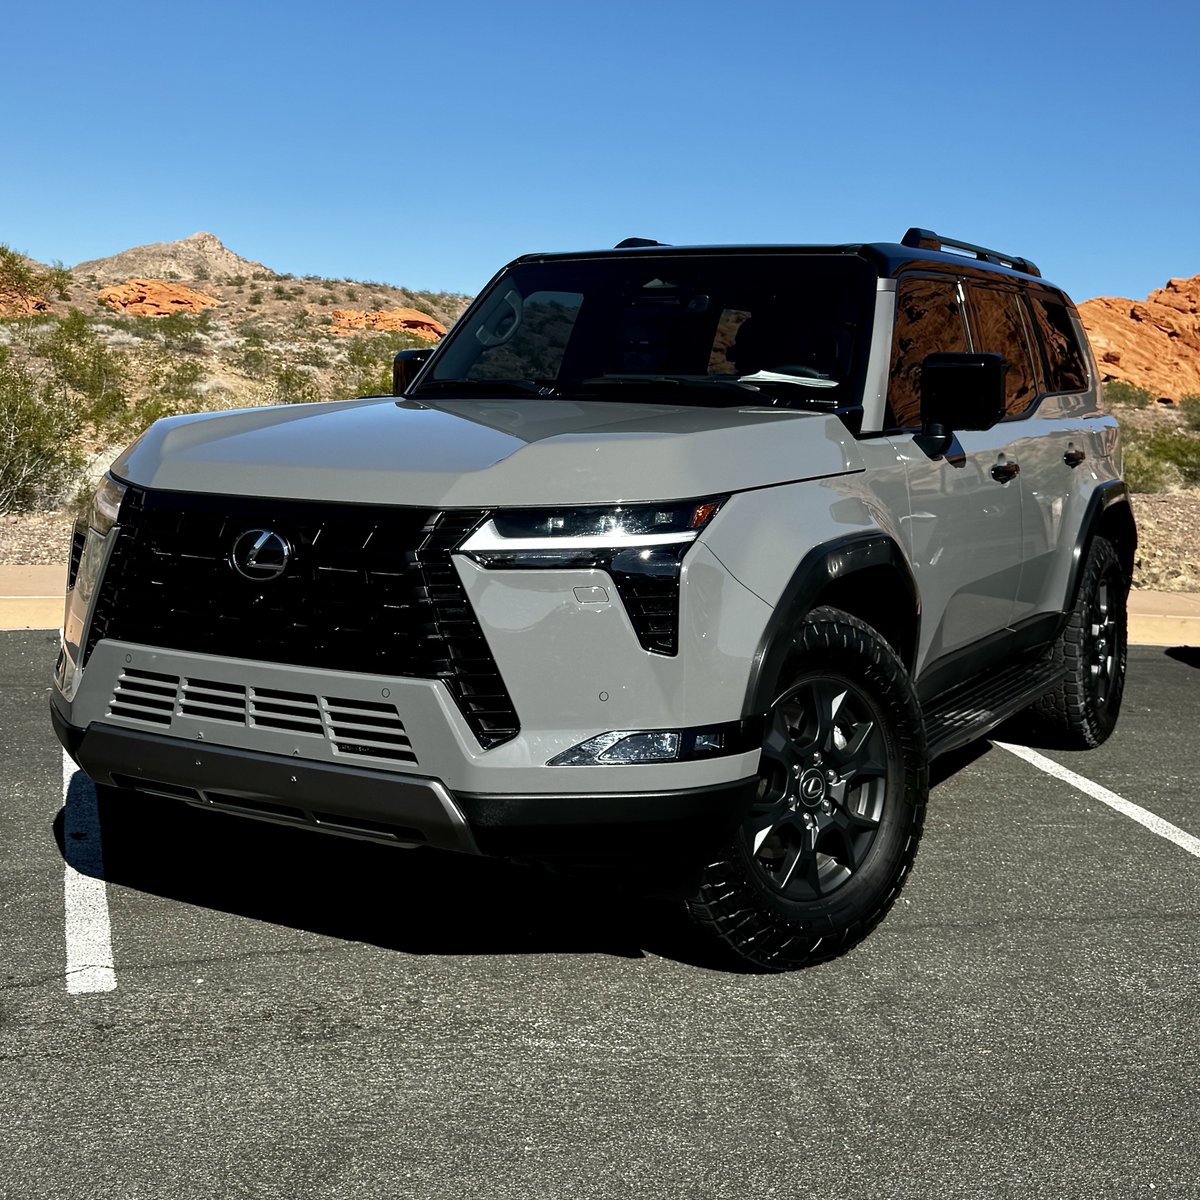 Spending time with the All-New 2024 Lexus GX Overtrail SUV 4WD shown in Incognito paint at Lake Mead, Nevada! (📷: @lexuswesternarea IG)  

 * 2024 GX pre-production model pictured. Not available for purchase.

#Lexus #LexusGX #LexusGX550 #GX550 #Lexususa #lookatmylexus